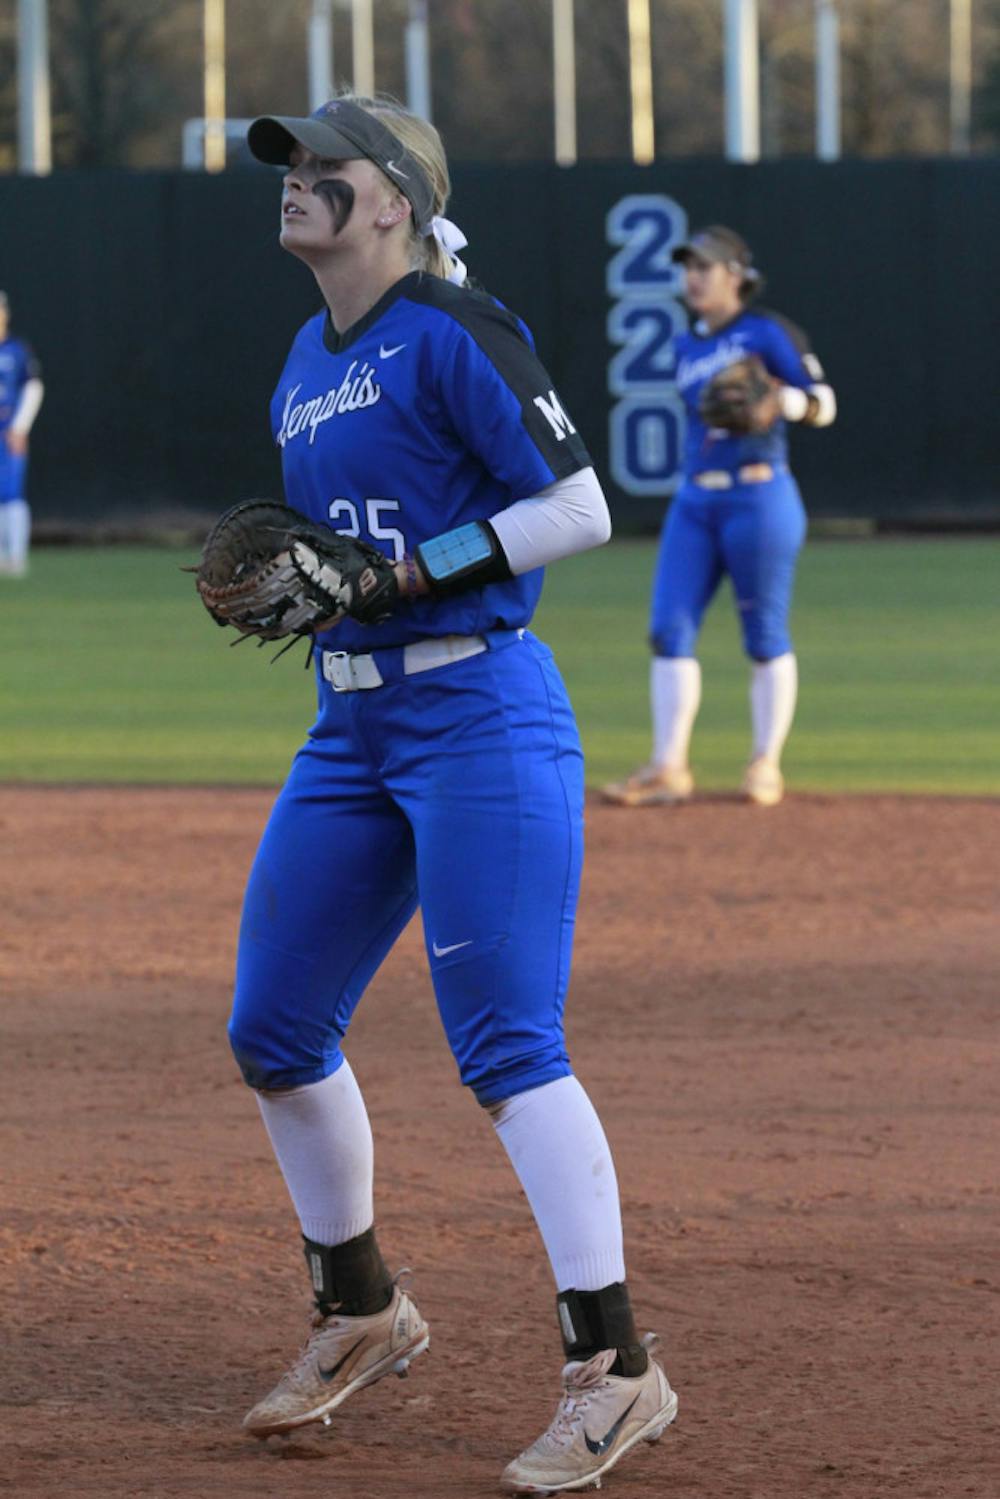 <p>Ashley Threatt gets set to field a groundball.  She is tied with Brooke Lee leading the team with five home runs this season</p>